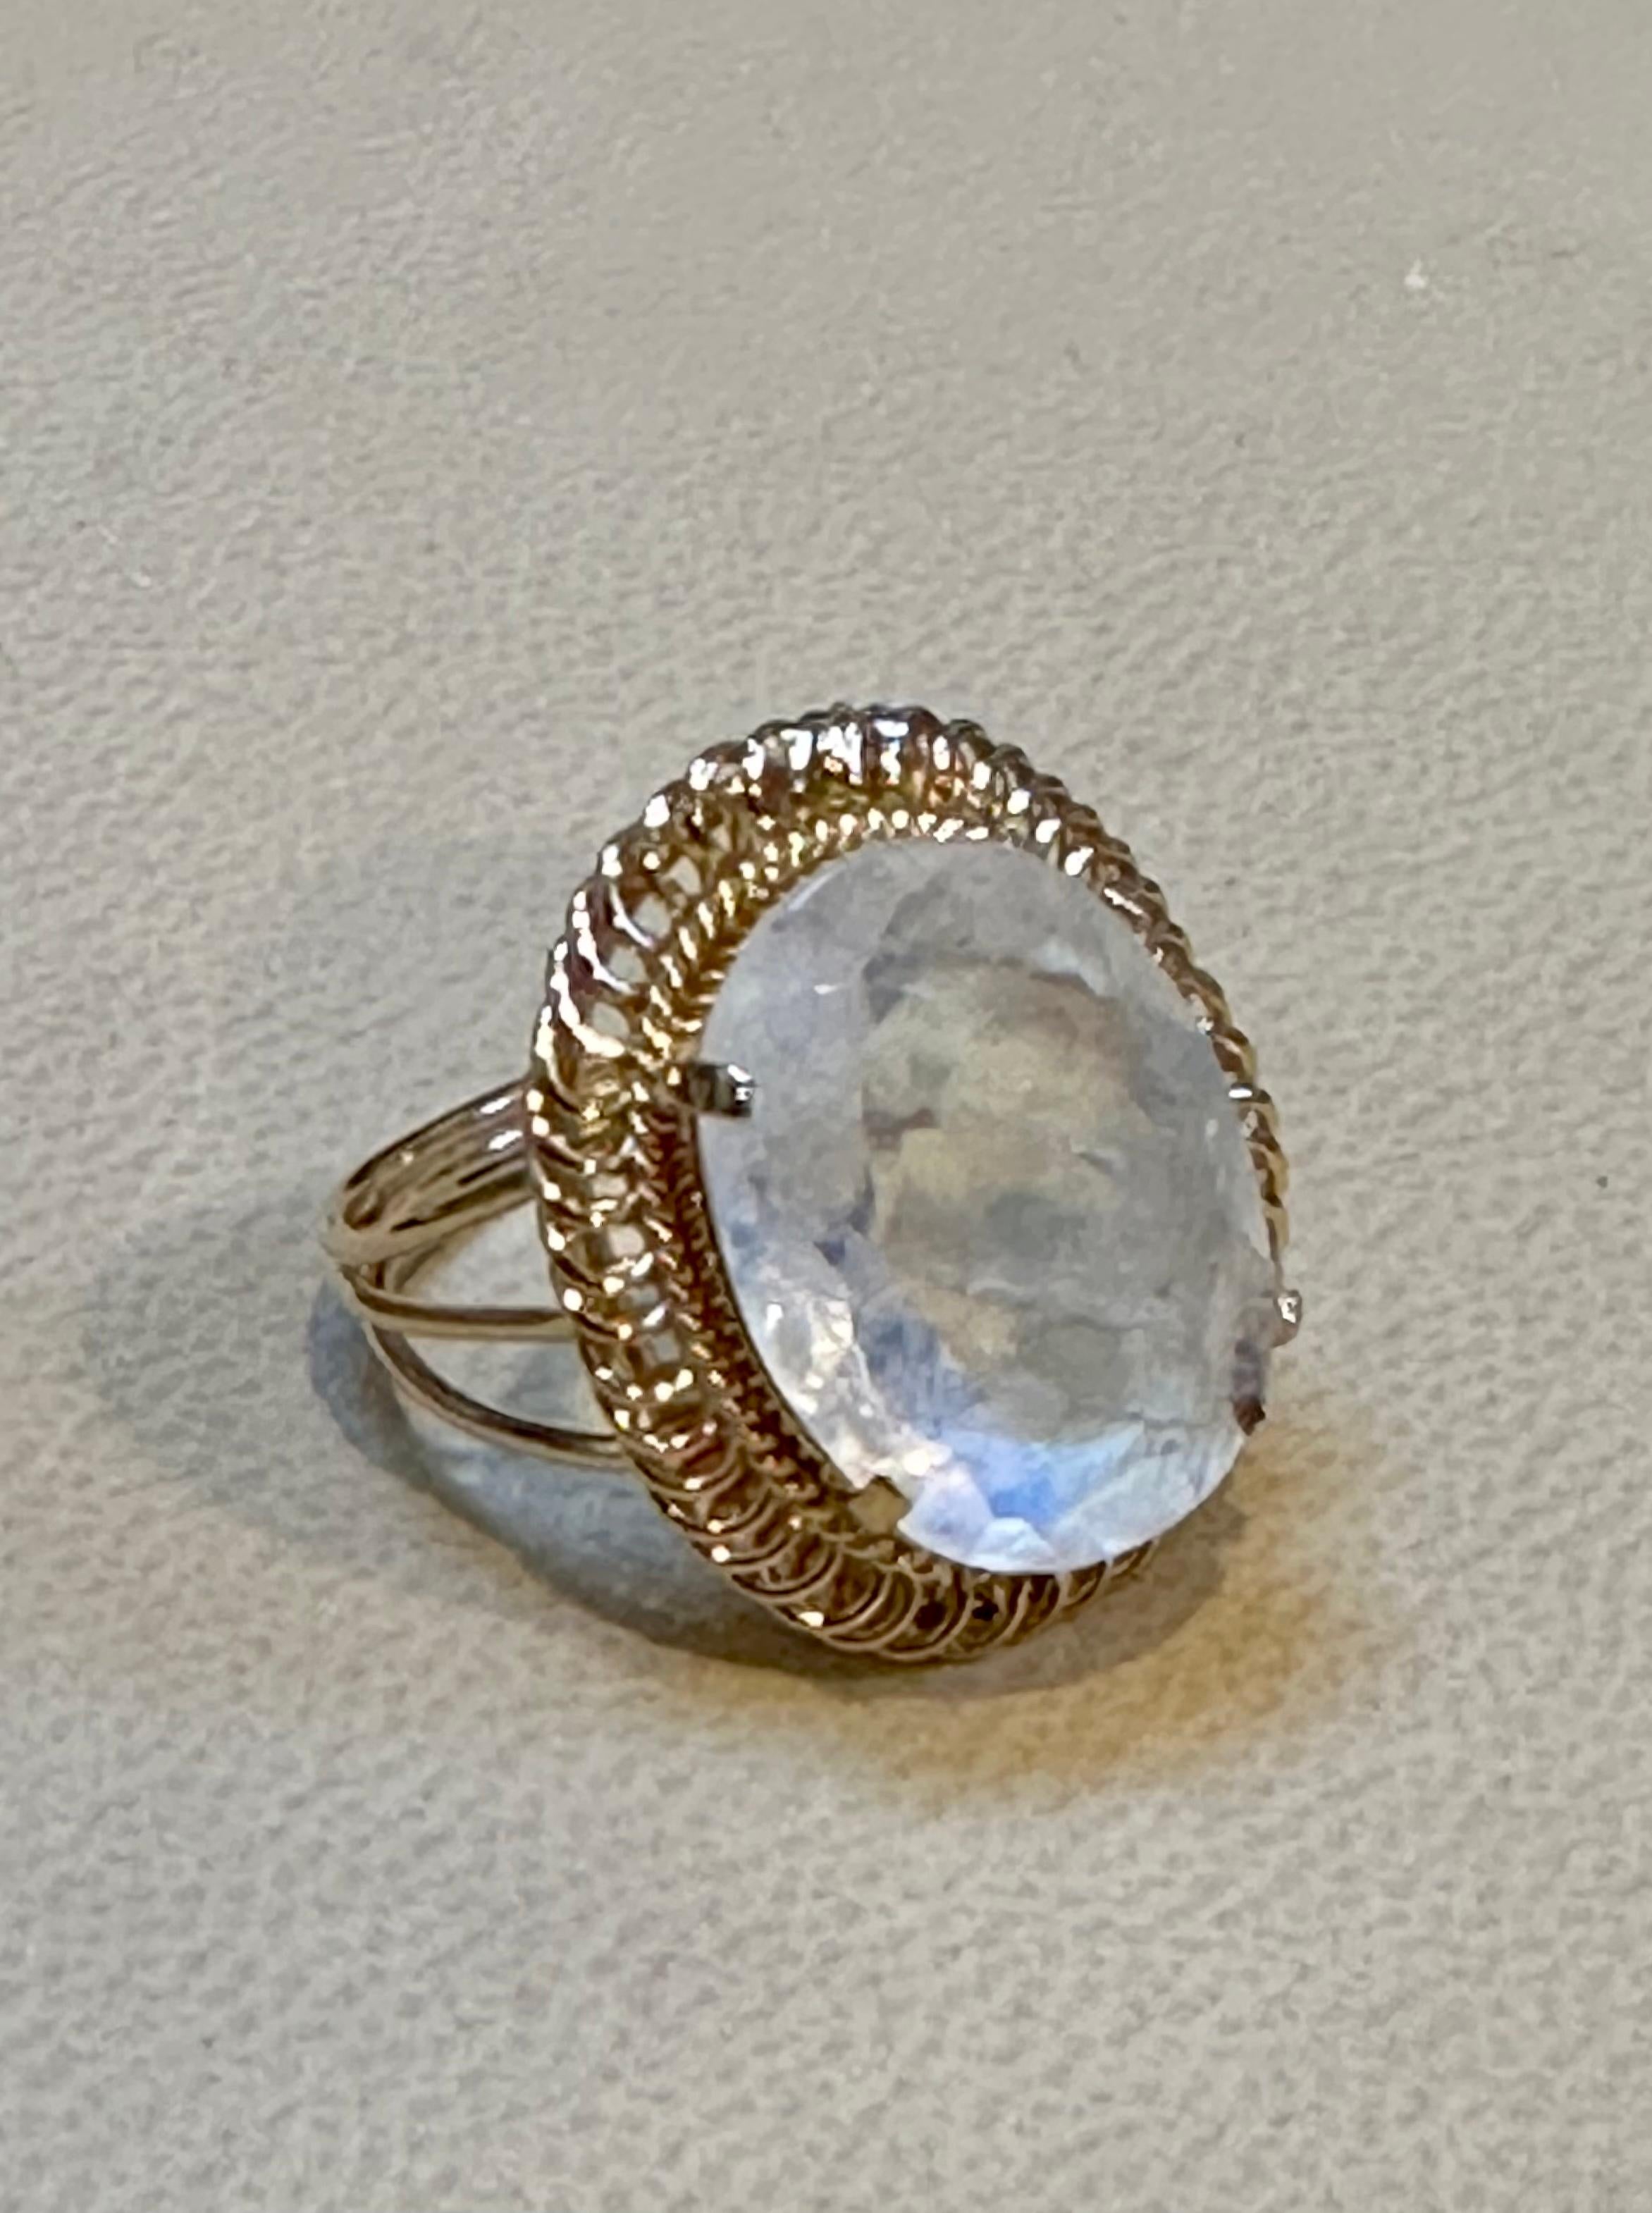 approximately 7 Carat Oval Shape Moon Stone Cocktail Ring 14 Karat Yellow Gold Size 6
Oval  Natural Opal  A classic, Cocktail ring 
14 Karat Yellow Gold Estate
Size of the opal 16 X 13 MM, Approximately 7 Ct

Huge Moon Stone clean and Good quality 